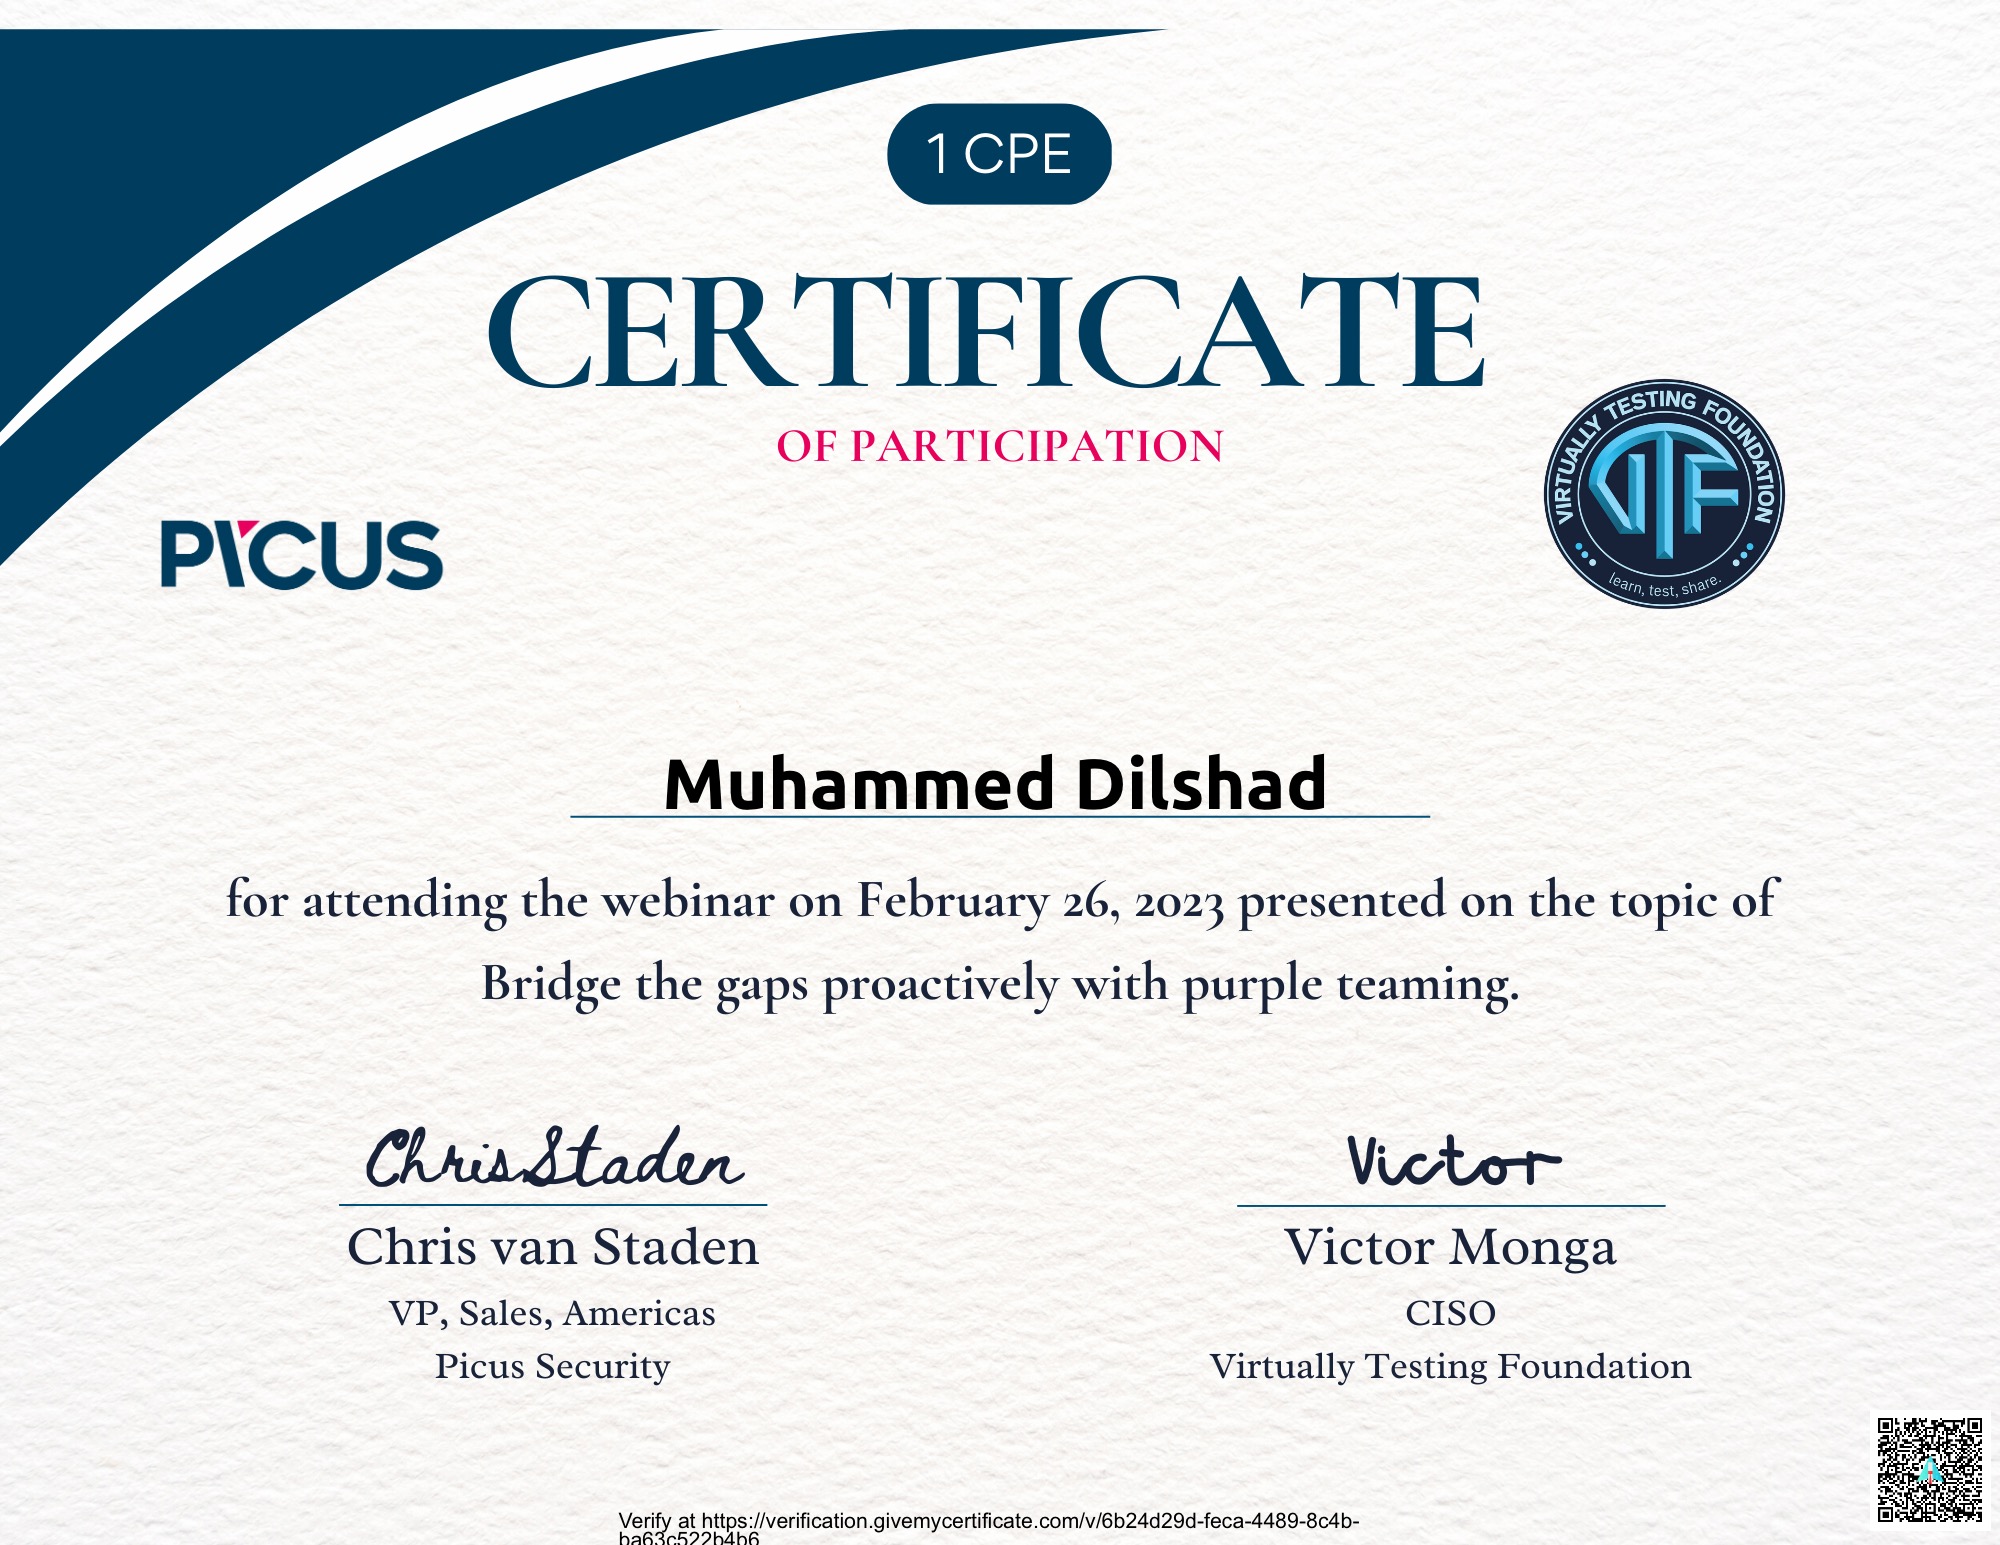 CERTIFICATE

OF PARTICIPATION

 

P\CUS

Muhammed Dilshad

for attending the webinar on February 26, 2023 presented on the topic of

 

Bridge the gaps proactively with purple teaming.

Chrindladon Victor

Chris van Staden Victor Monga
VP, Sales, Americas CISO
Picus Security Virtually Testing Foundation

Verify at https //verification givemycertificate com/v/6b24d29d-feca-4489-8c4b-
haRira8270h4bA